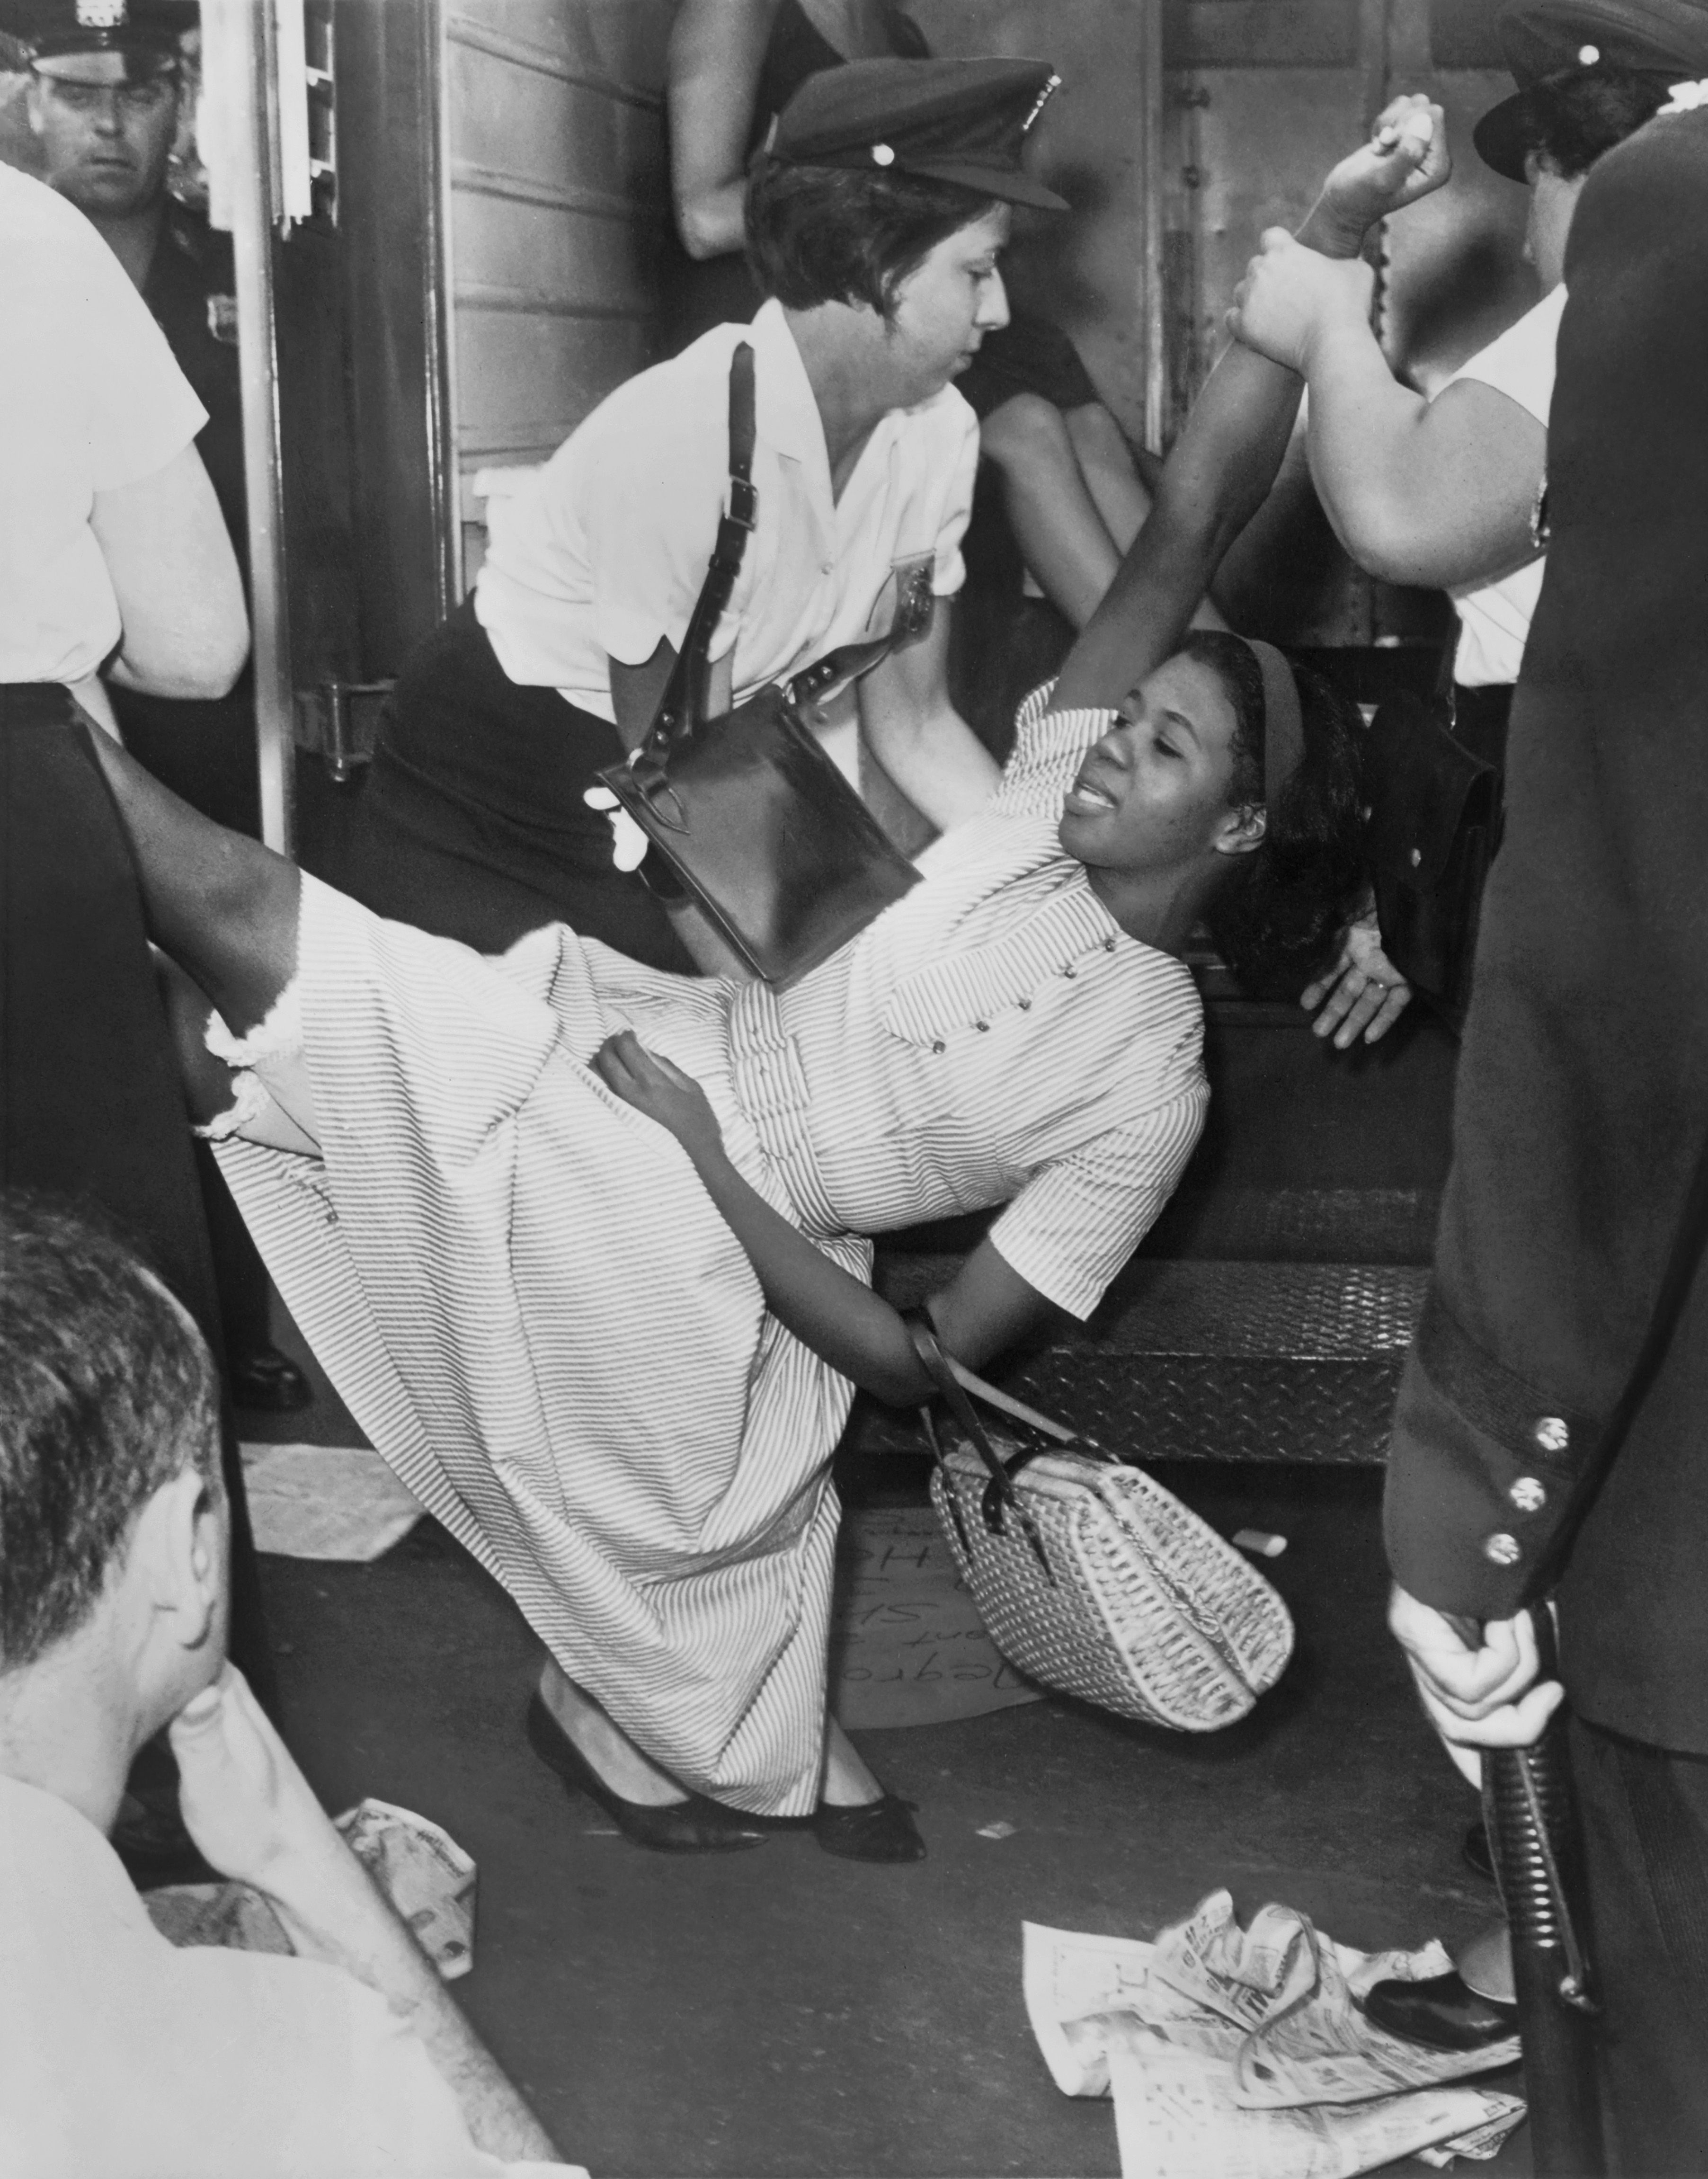 An African American Woman Being Carried to Police Patrol Wagon During Demonstration, Brooklyn, New York, 1963